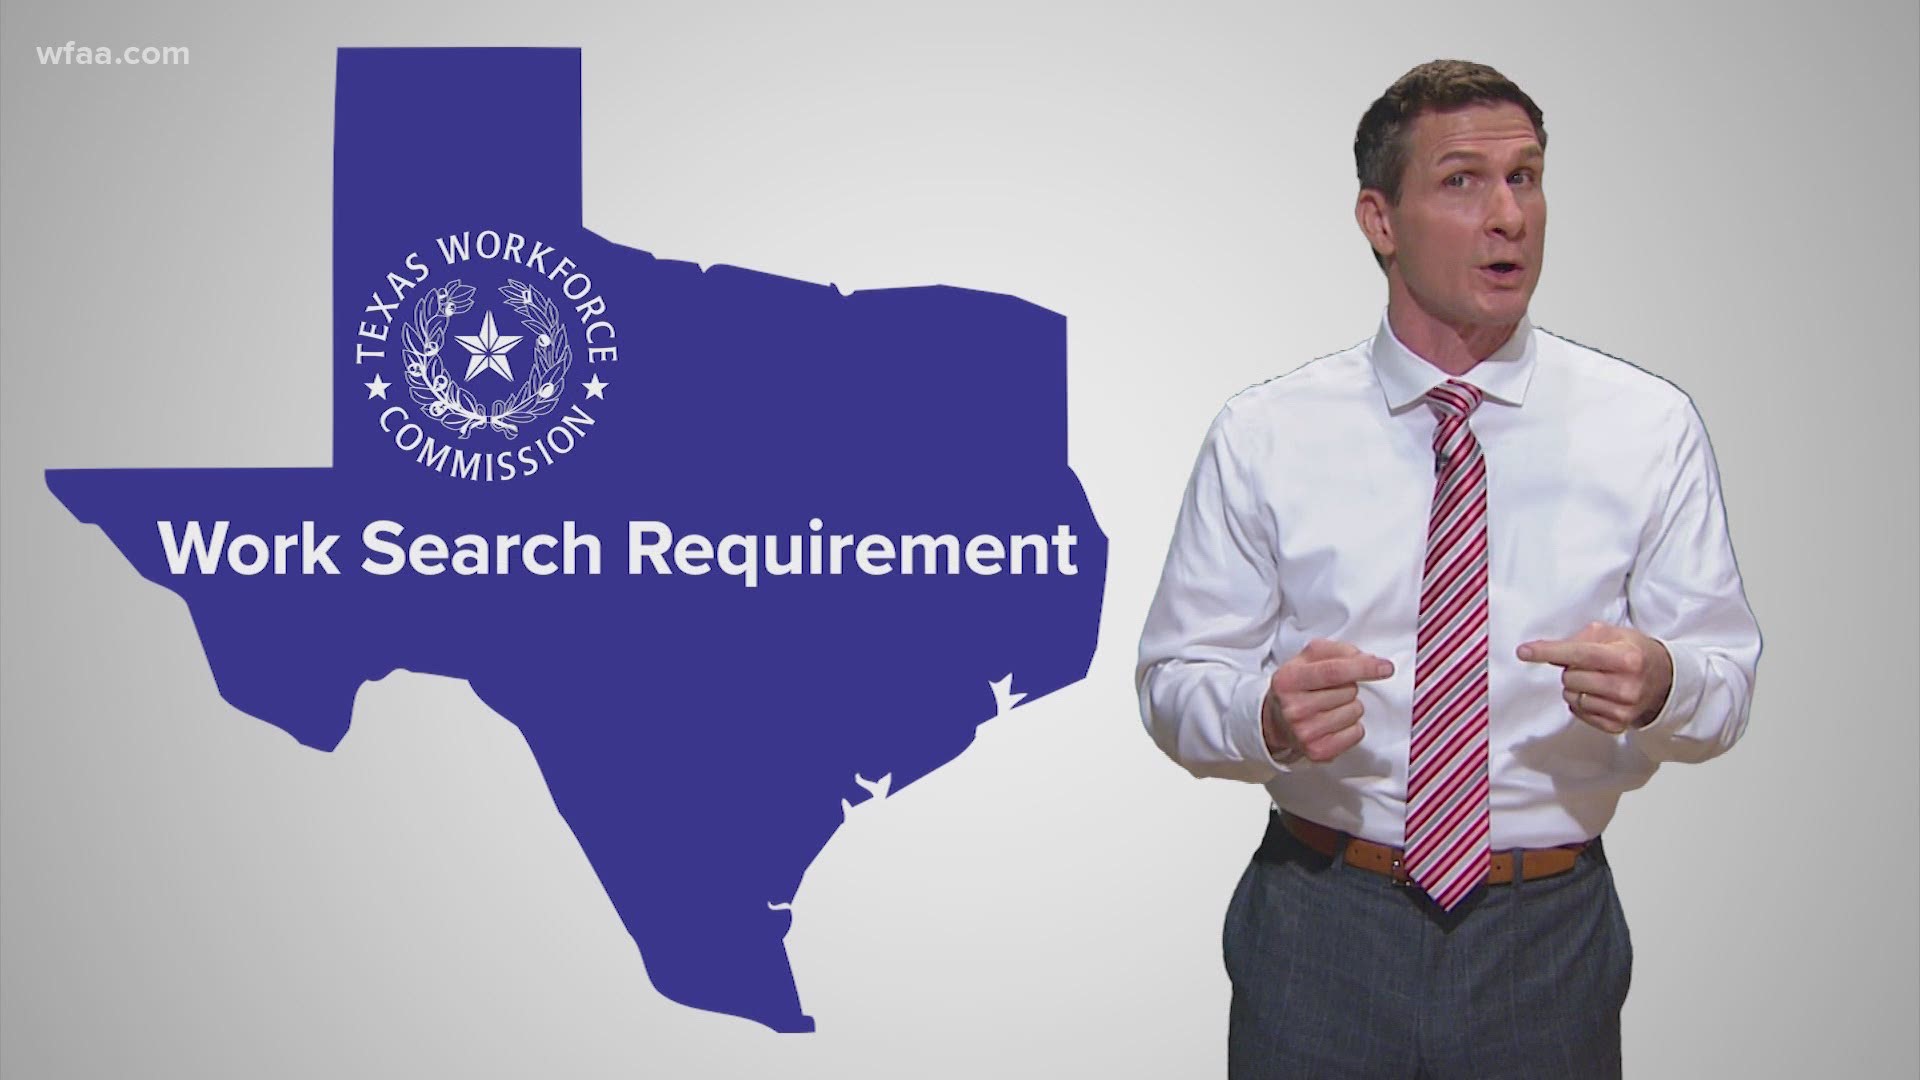 Gov. Greg Abbott announce further reopenings of the economy on Thursday, but the Texas Workforce Commission hasn't yet said if it will require work searches.